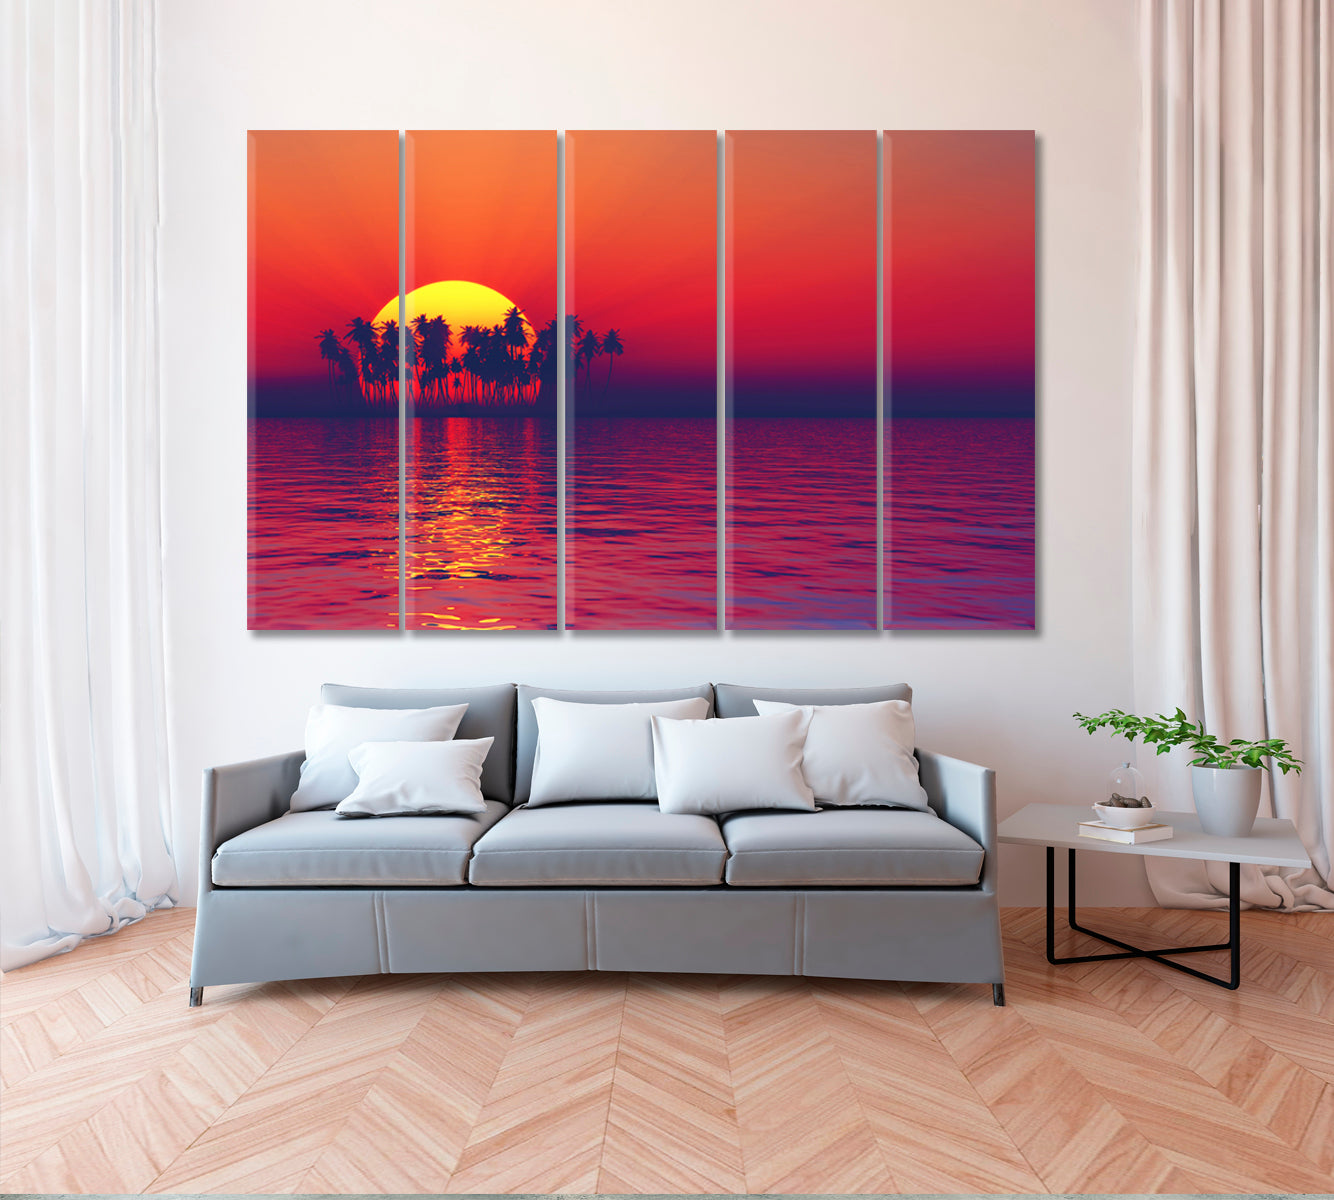 Tropical Island Sunset Canvas Print ArtLexy 5 Panels 36"x24" inches 